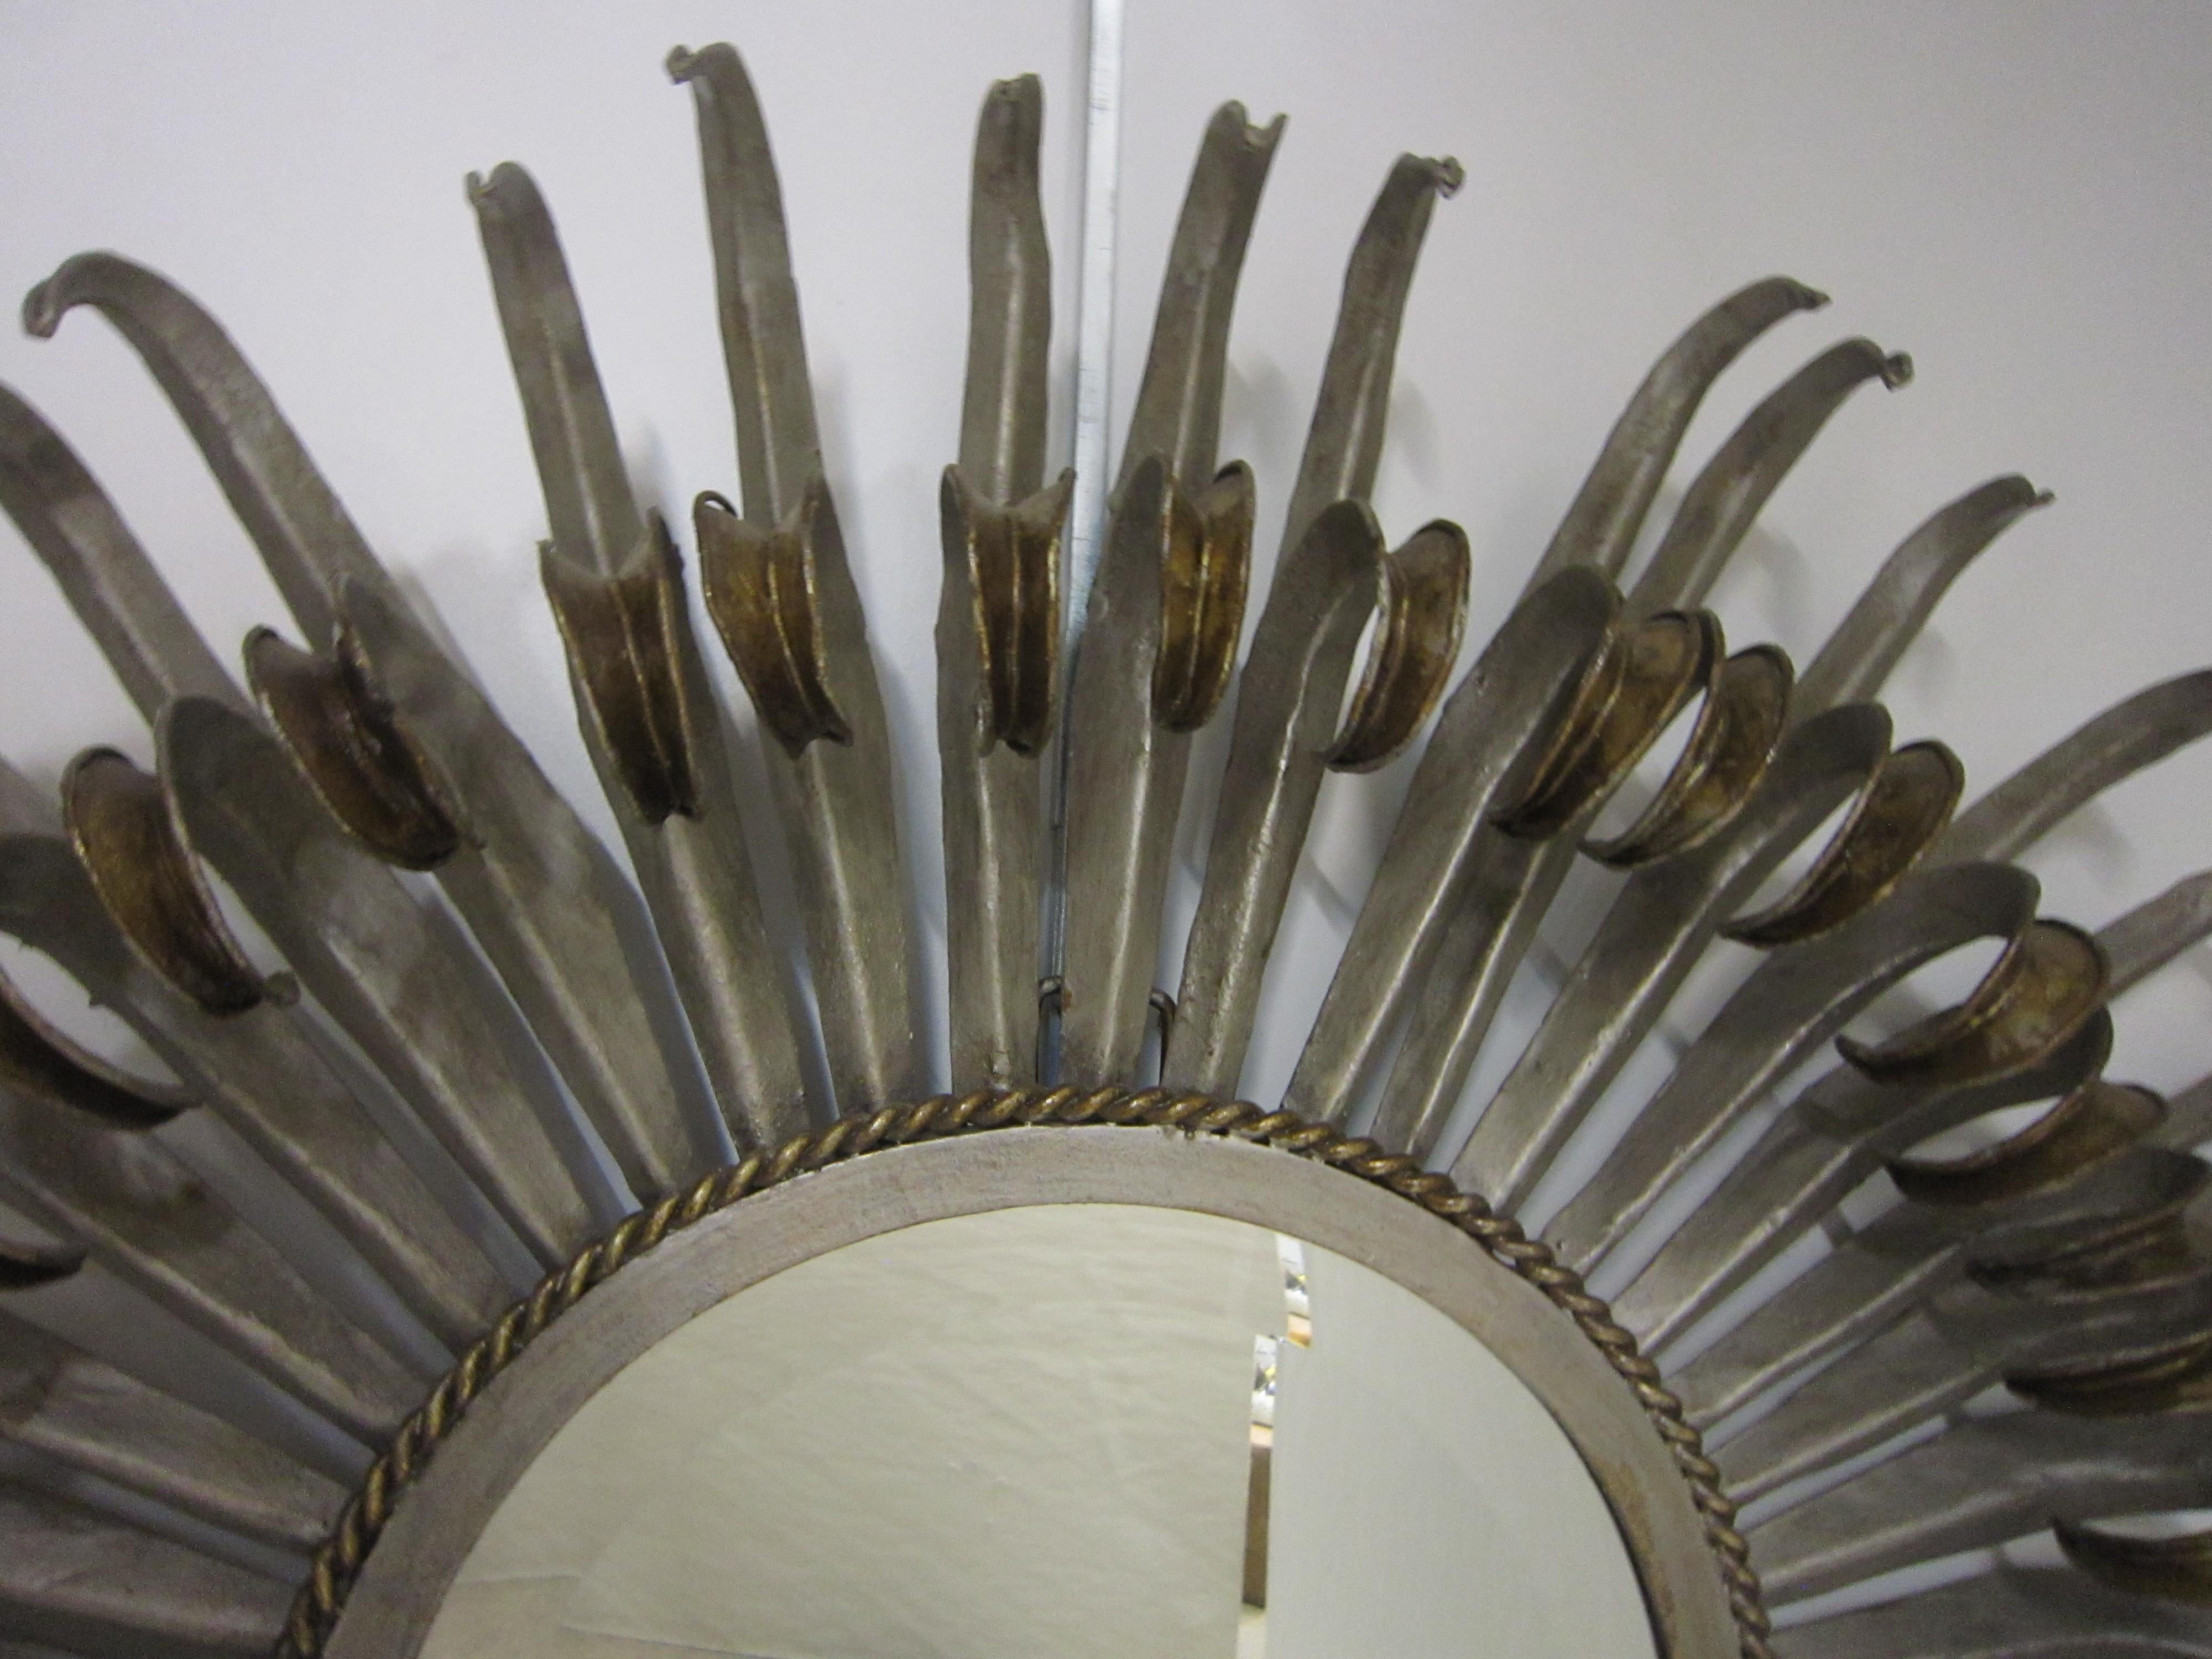 Pair of Midcentury Sunburst / Soleil Mirrors, Silver with Golden Bronze Accents For Sale 1